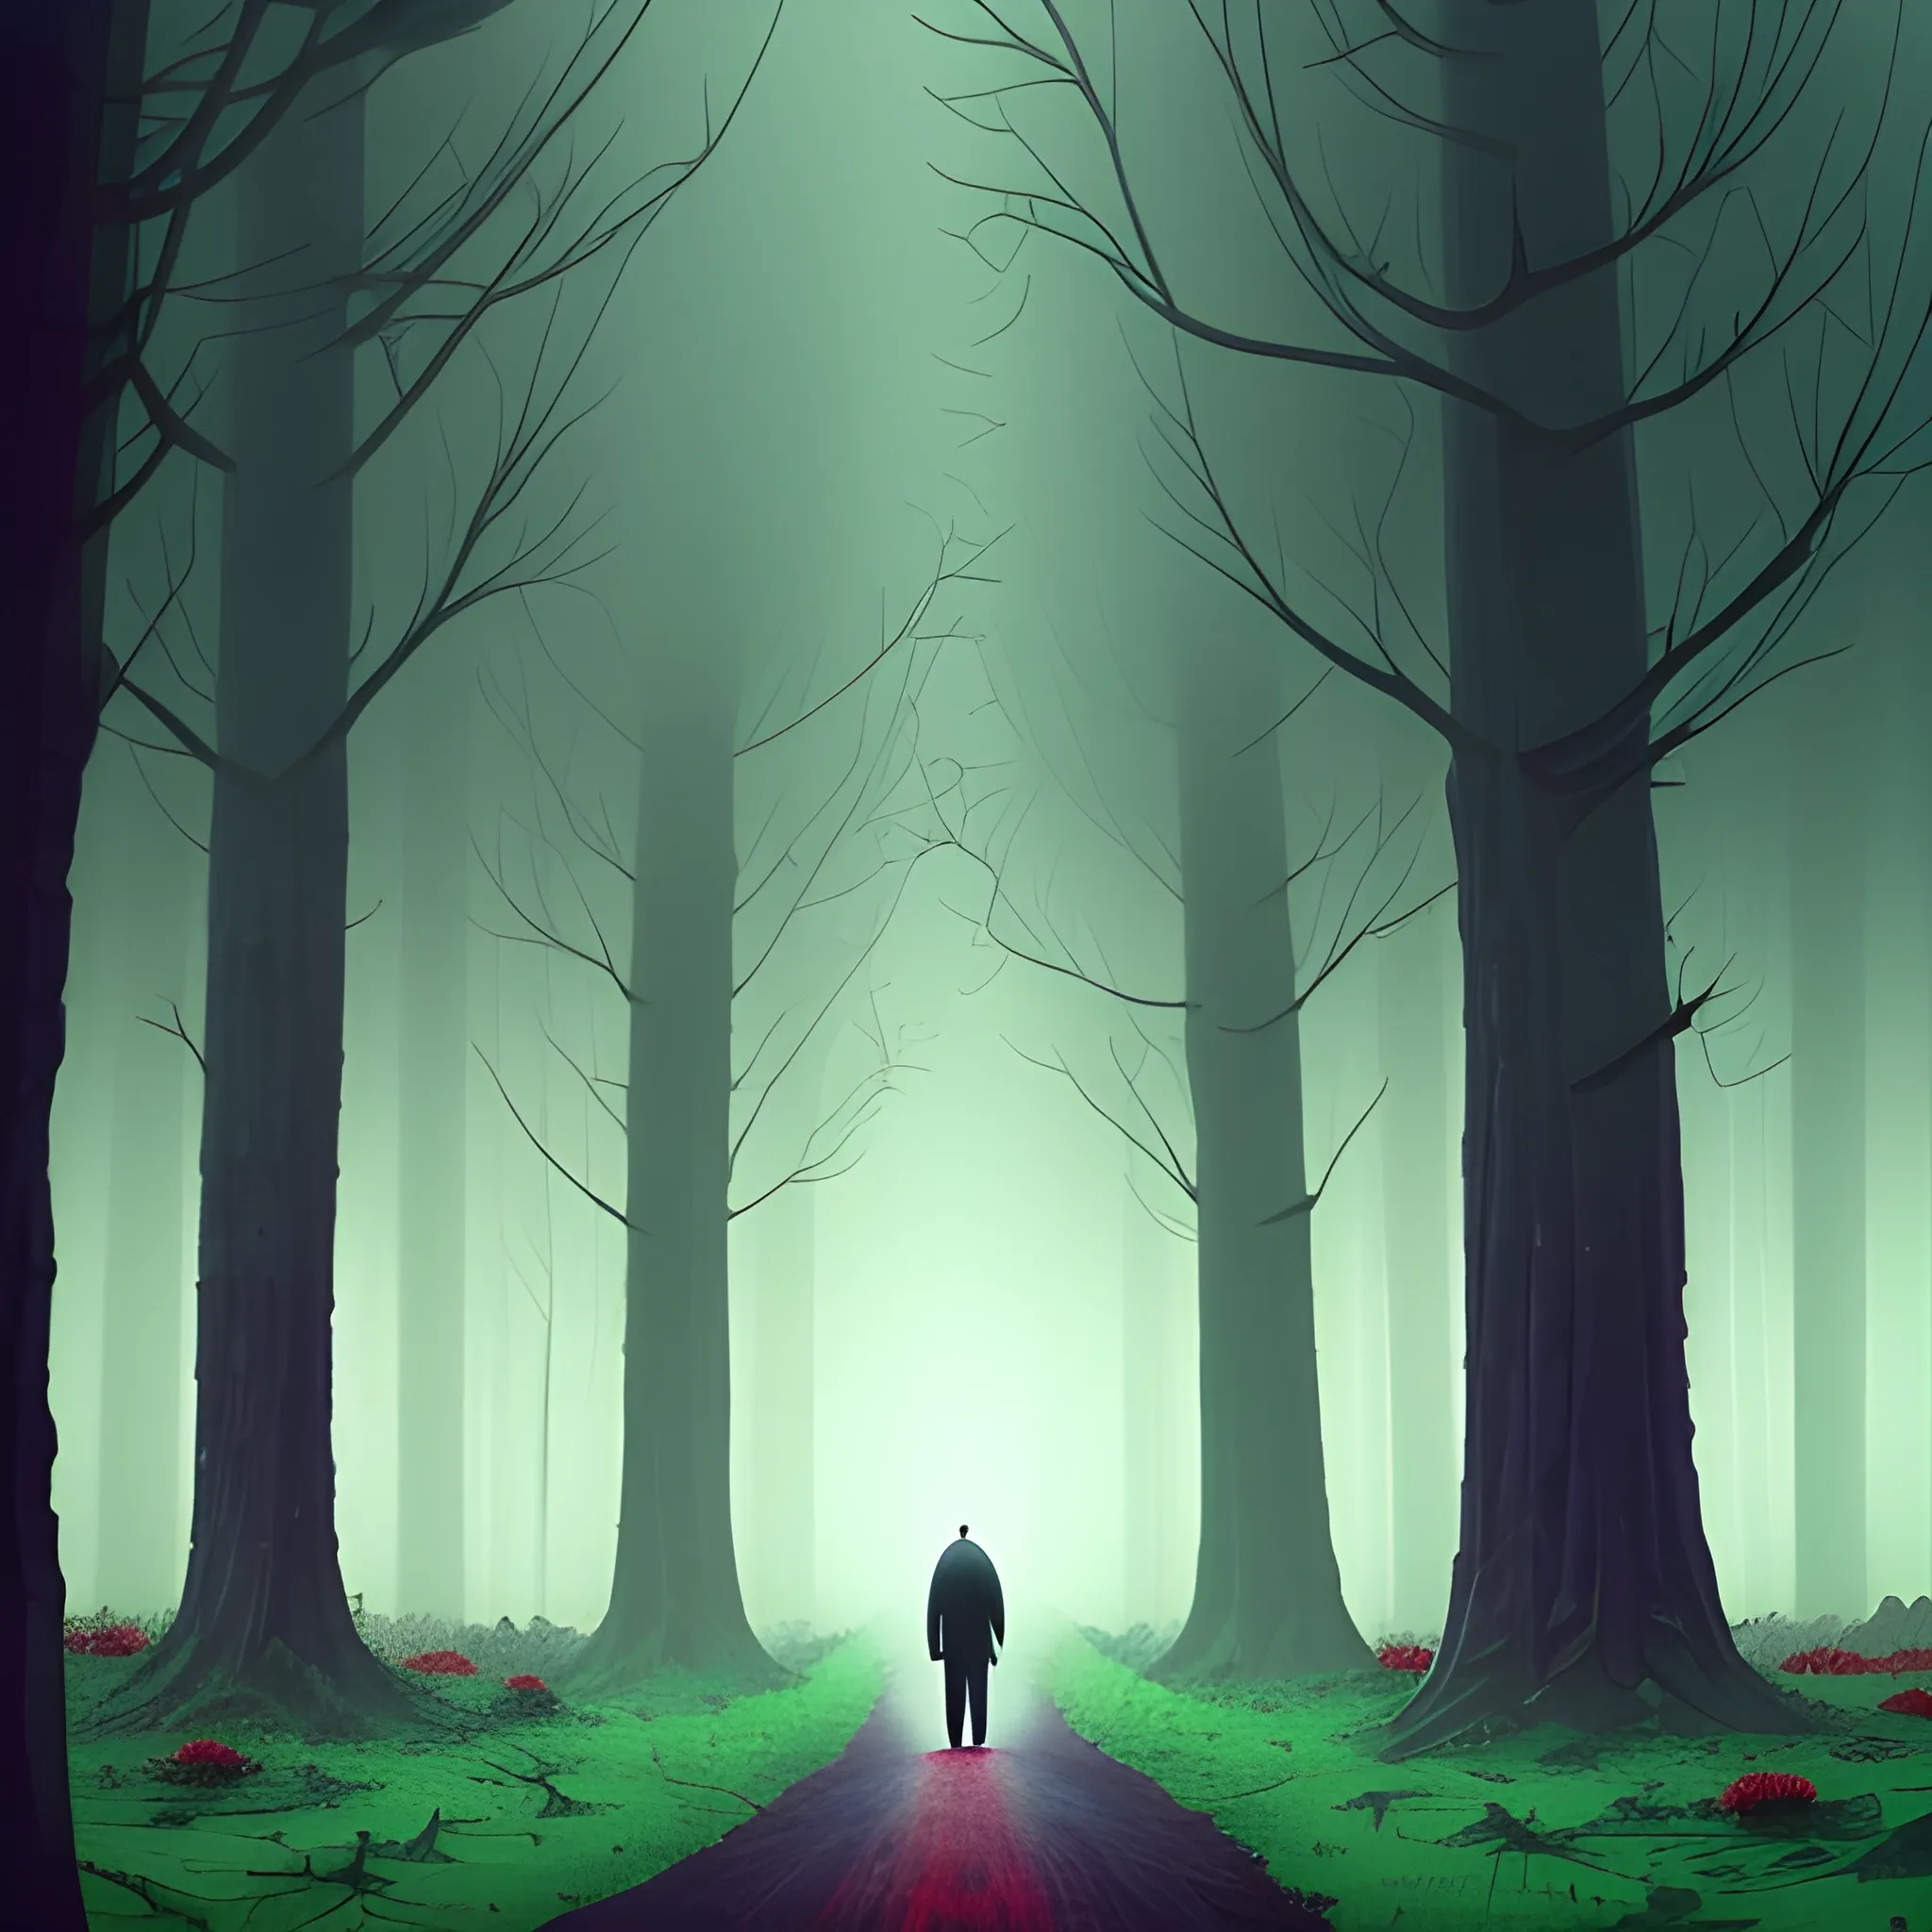 Lonely man in a black raincoat approaching a forest full of large trees and getting lost in the mist while in the background some thin red-eyed giants wait for him , Trippy, Cartoon